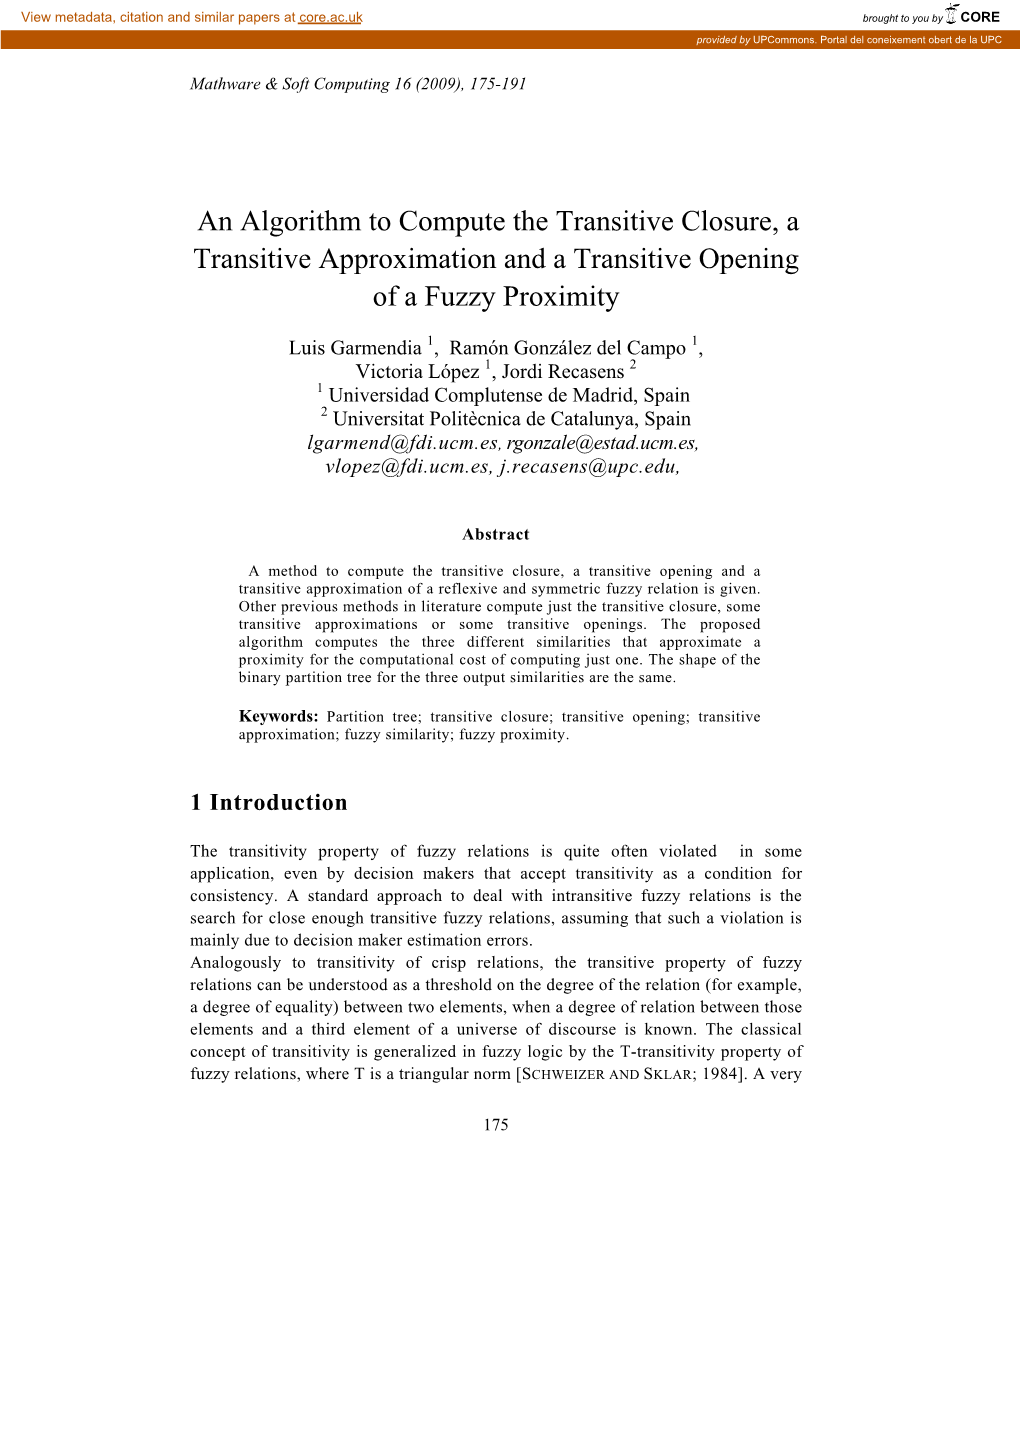 An Algorithm to Compute the Transitive Closure, a Transitive Approximation and a Transitive Opening of a Fuzzy Proximity